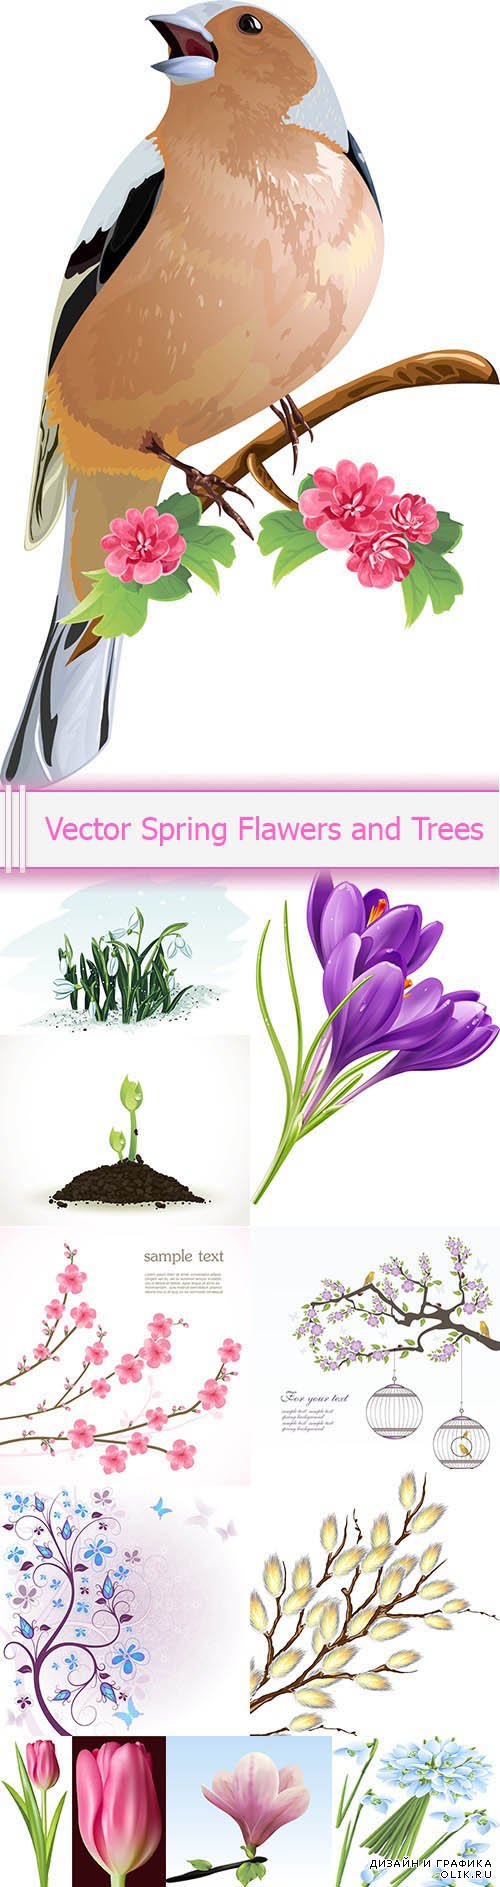 Vector Spring Flawers and Trees